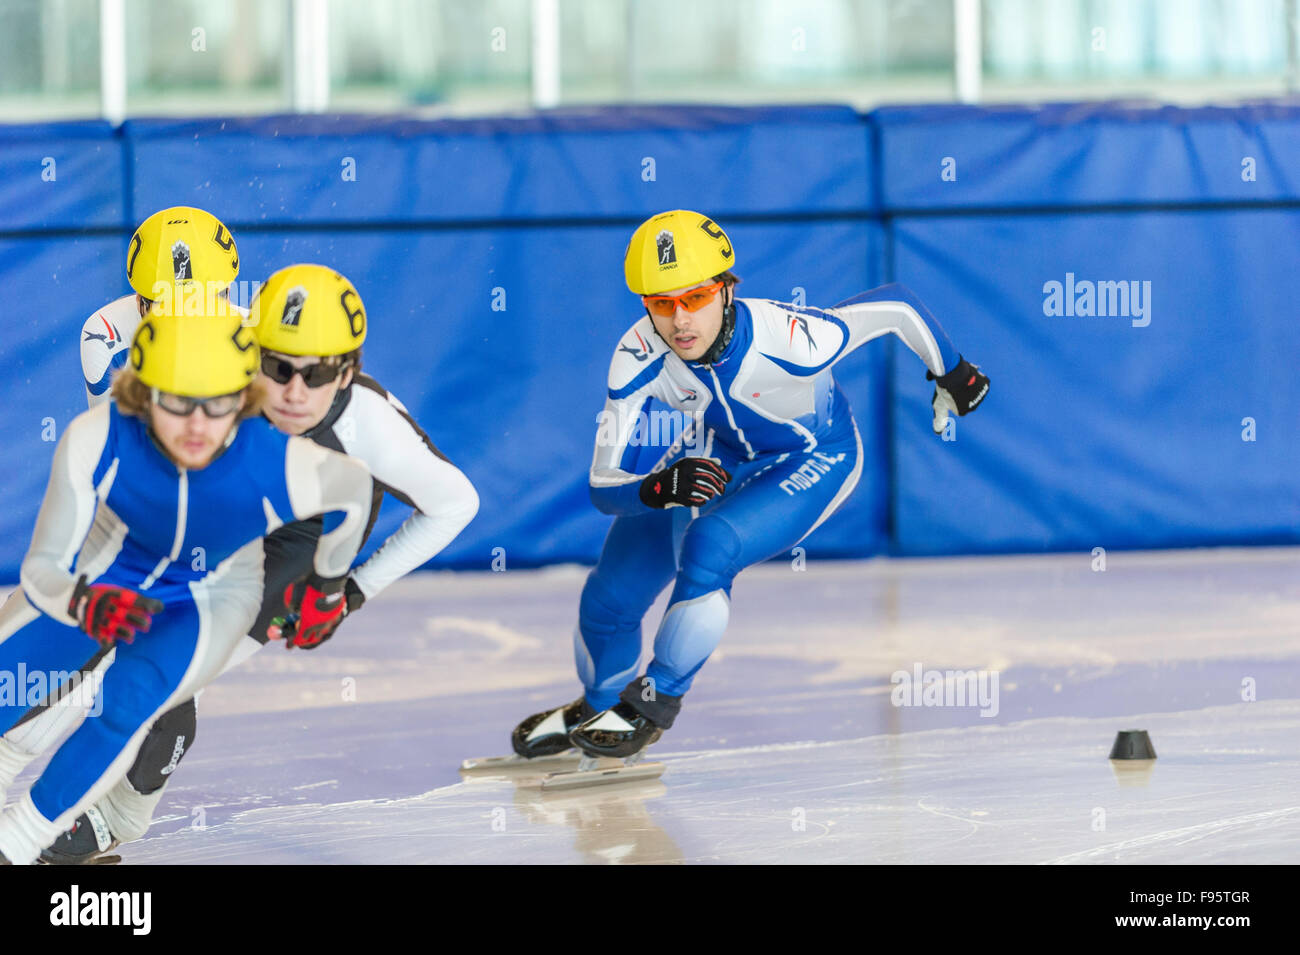 Canadian Shorttrack speed skating competition. 500 m sprint heats,in Olympic Oval 2014,Richmond BC, Canada. Stock Photo